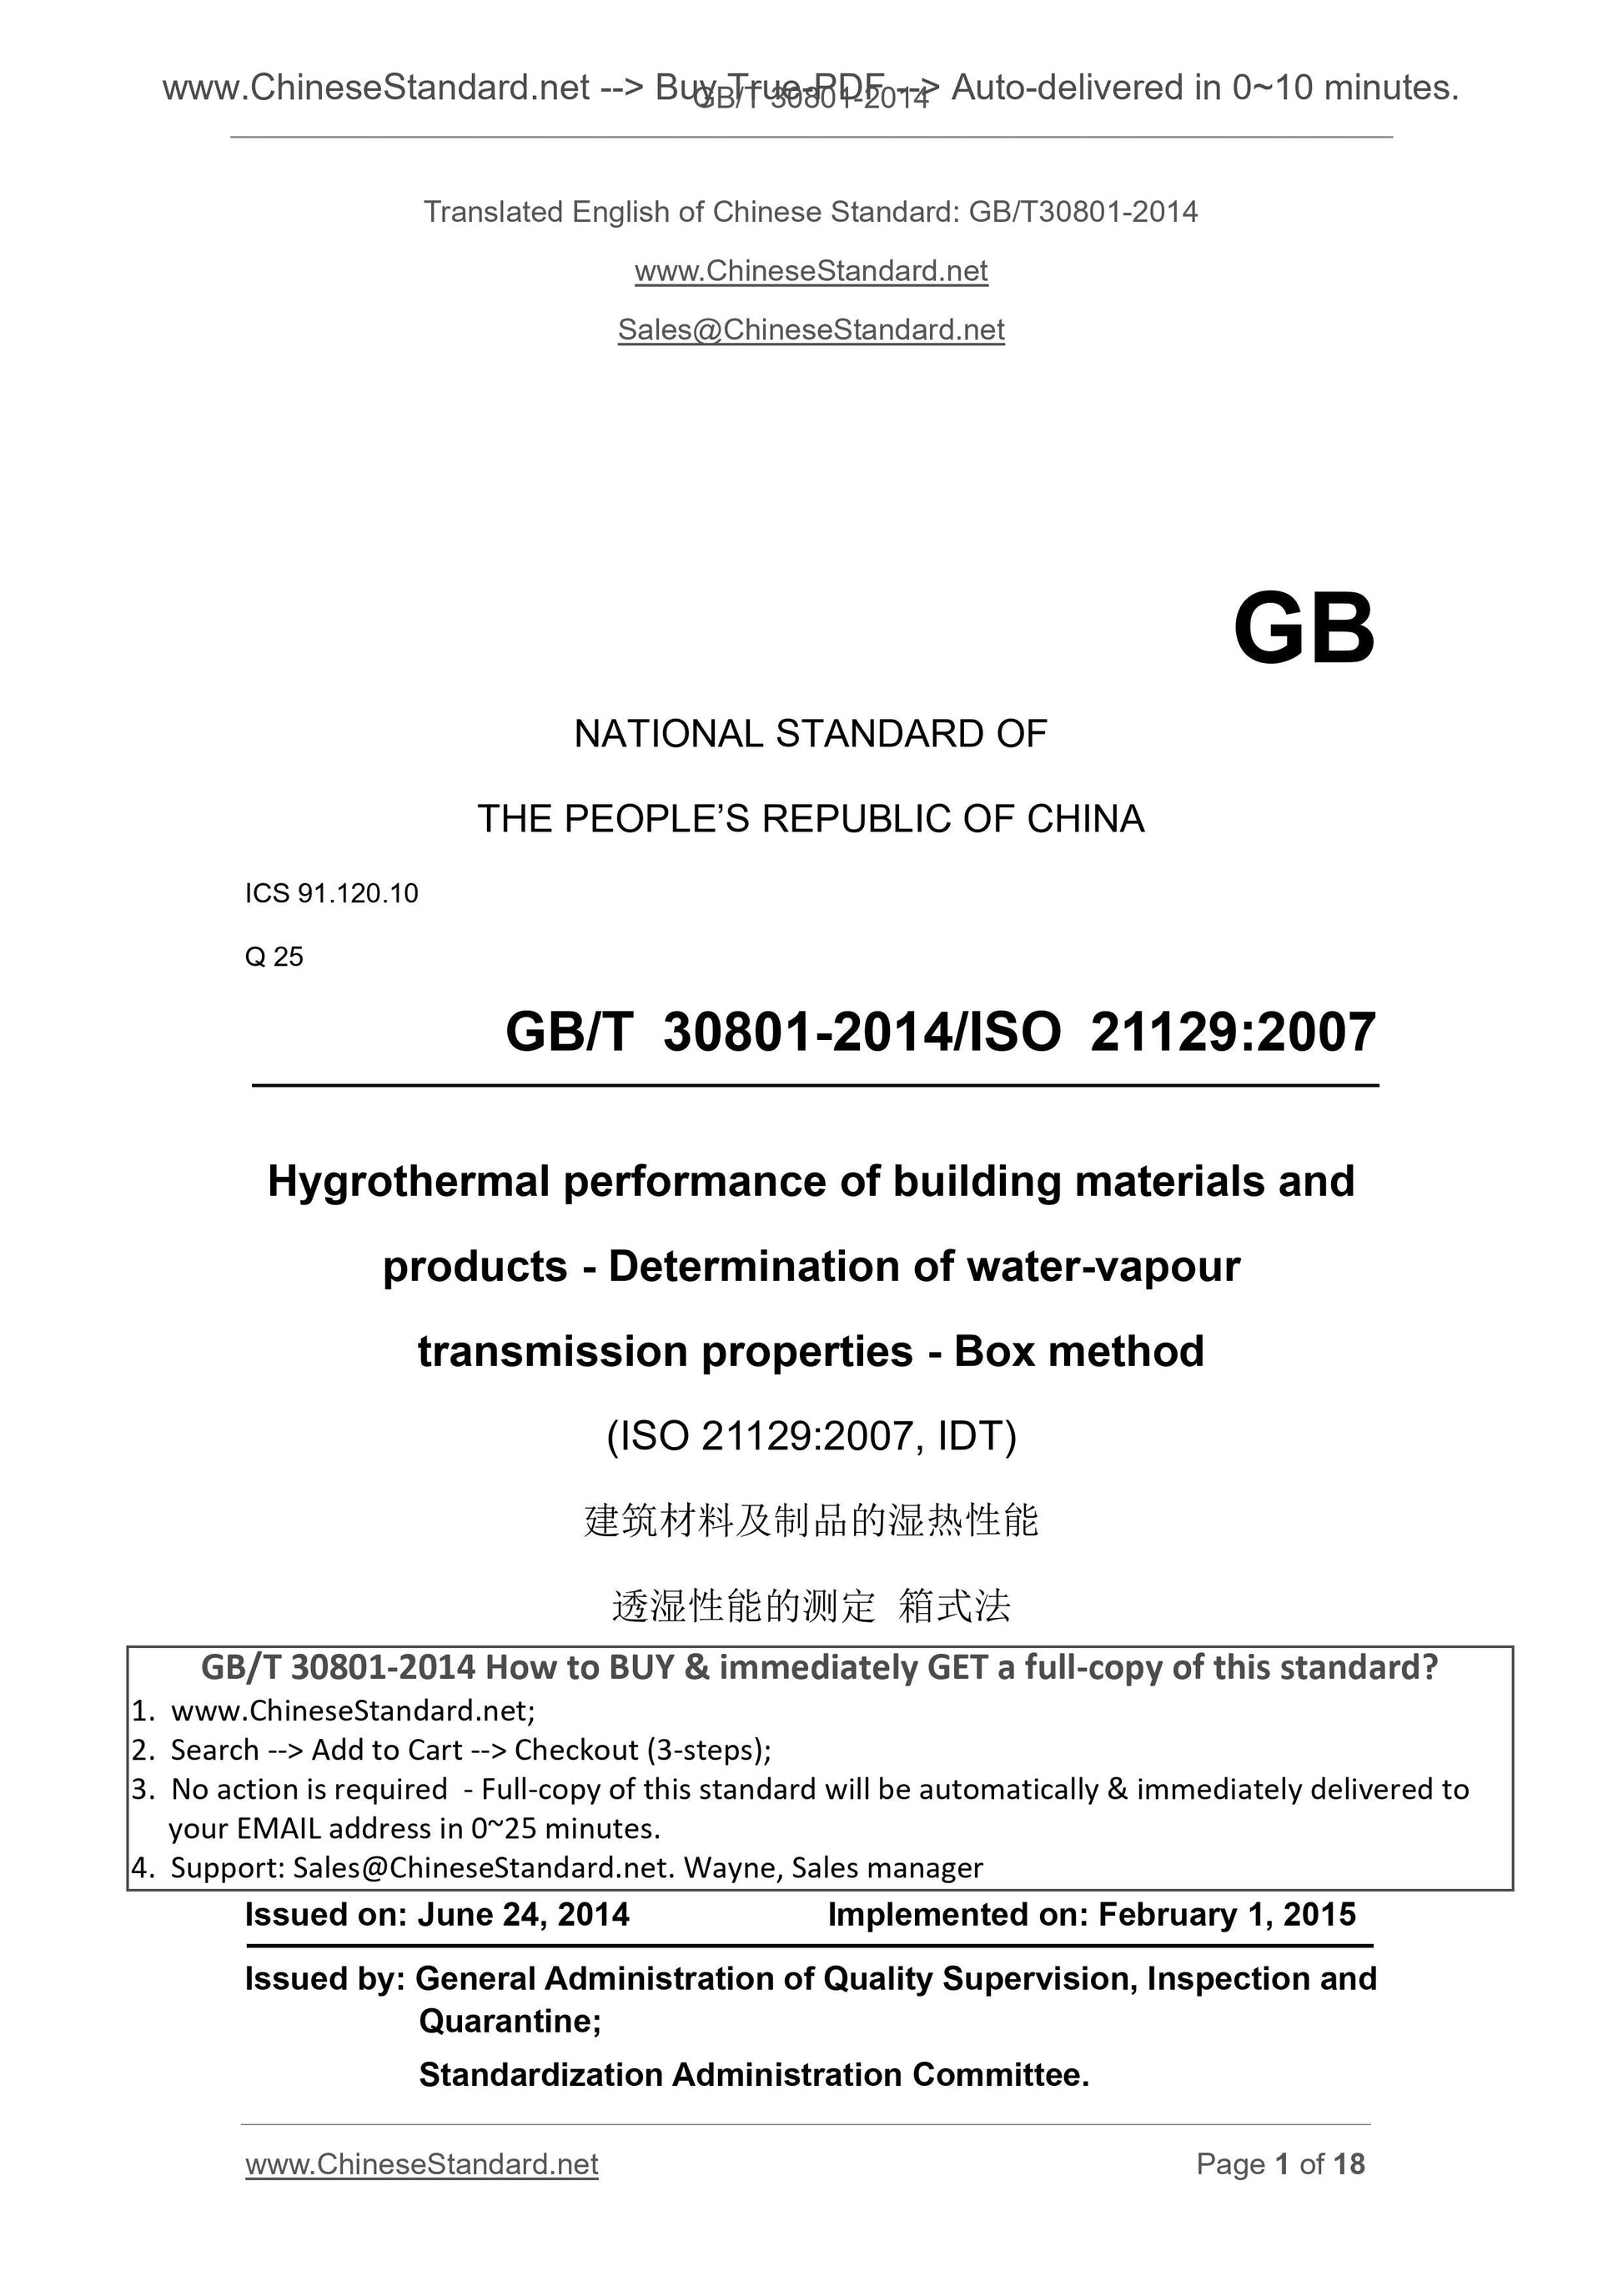 GB/T 30801-2014 Page 1